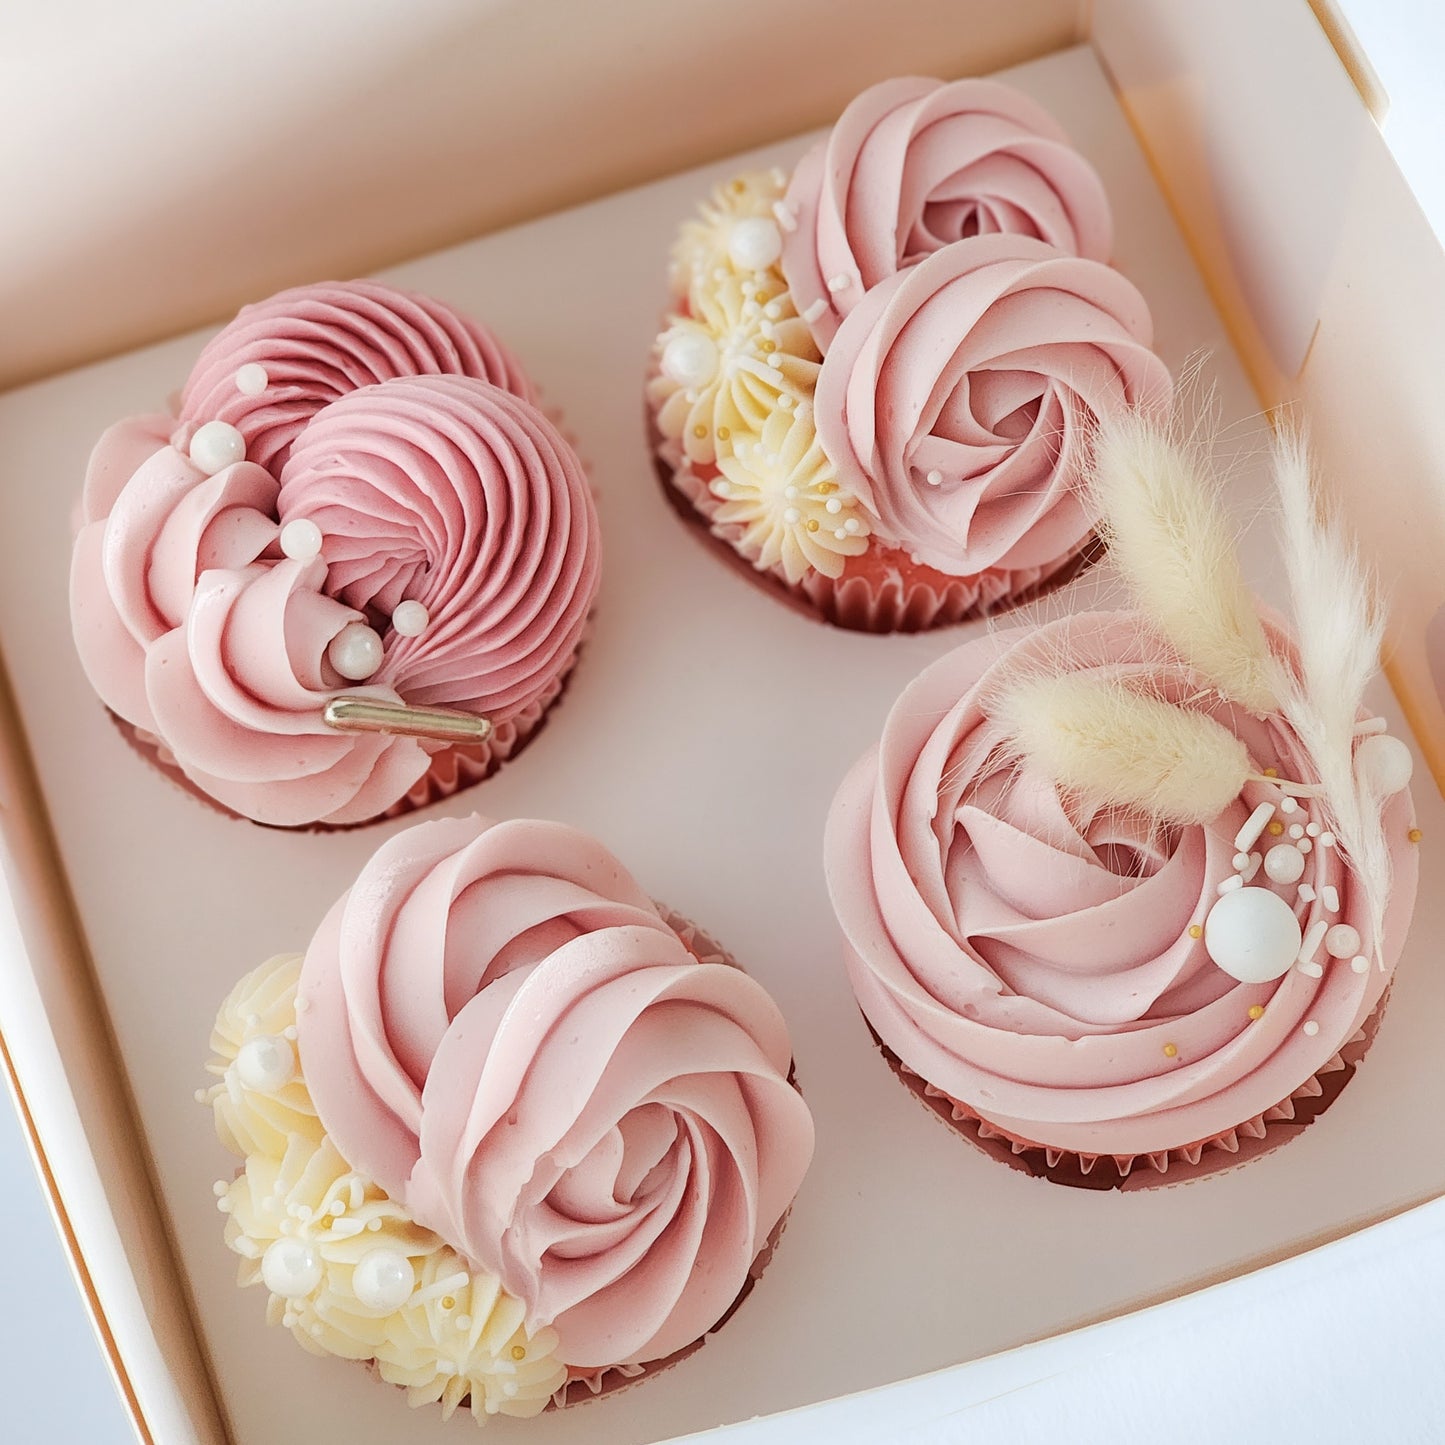 Beautiful strawberry cupcakes with strawberry swiss meringue buttercream frosting